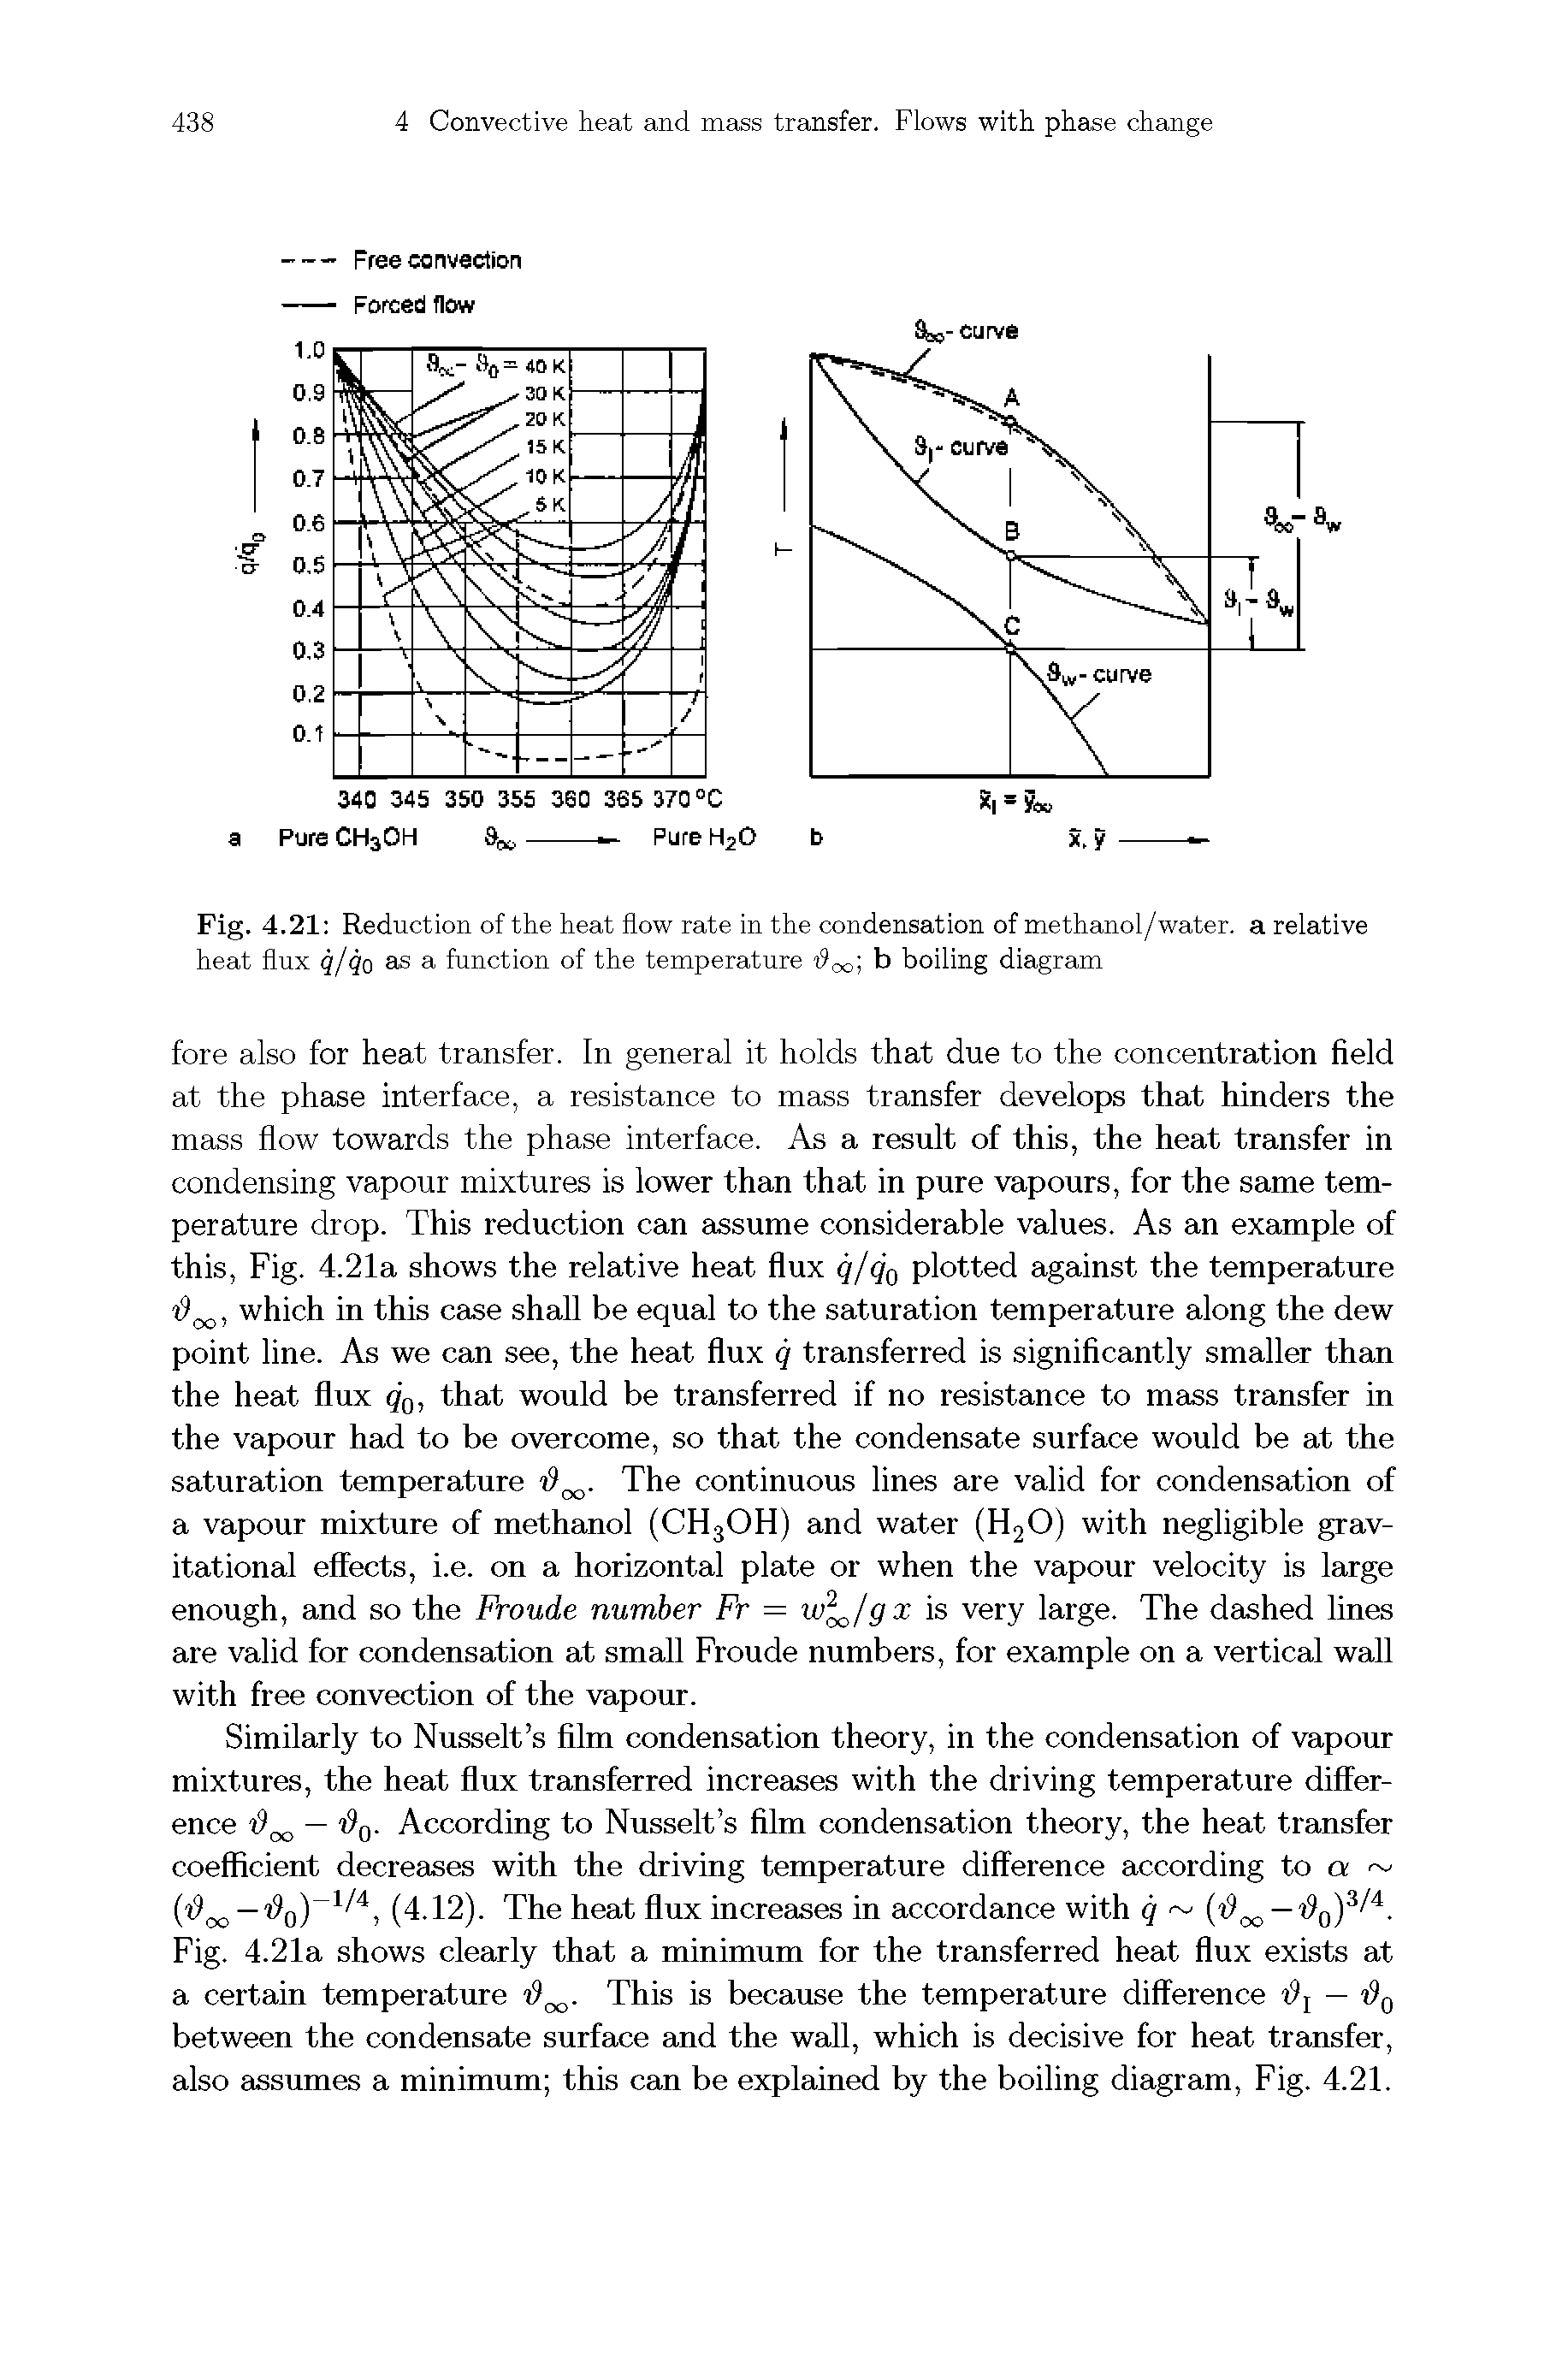 Fig. 4.21 Reduction of the heat flow rate in the condensation of methanol/water, a relative heat flux q/qo as a function of the temperature 4 -IL b boiling diagram...